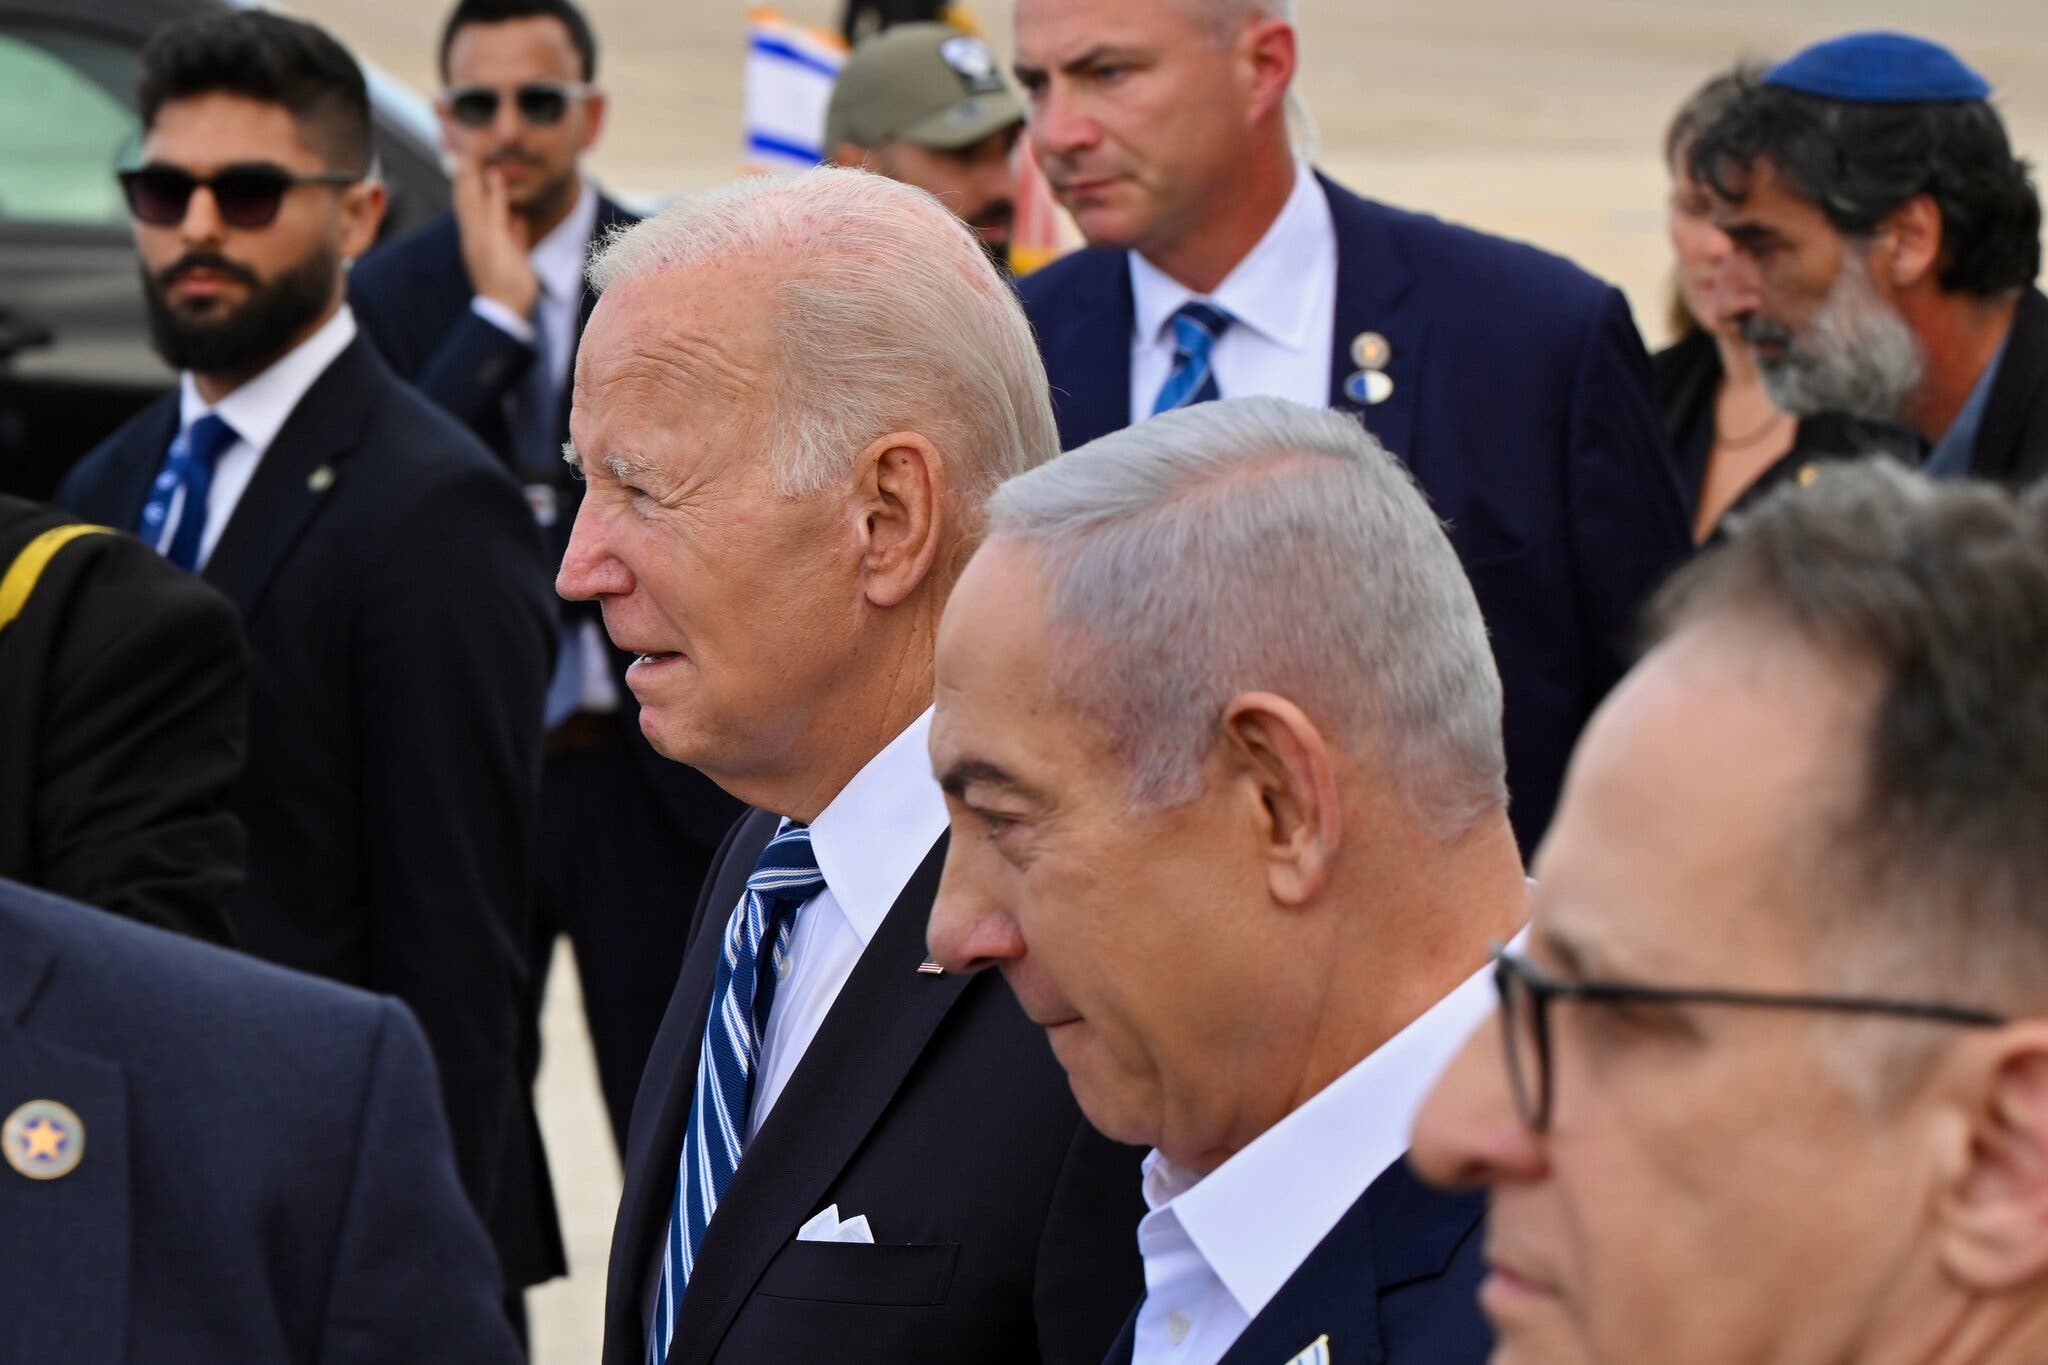 Biden and Aides Advise Israel to Avoid Widening War With Hezbollah Strike